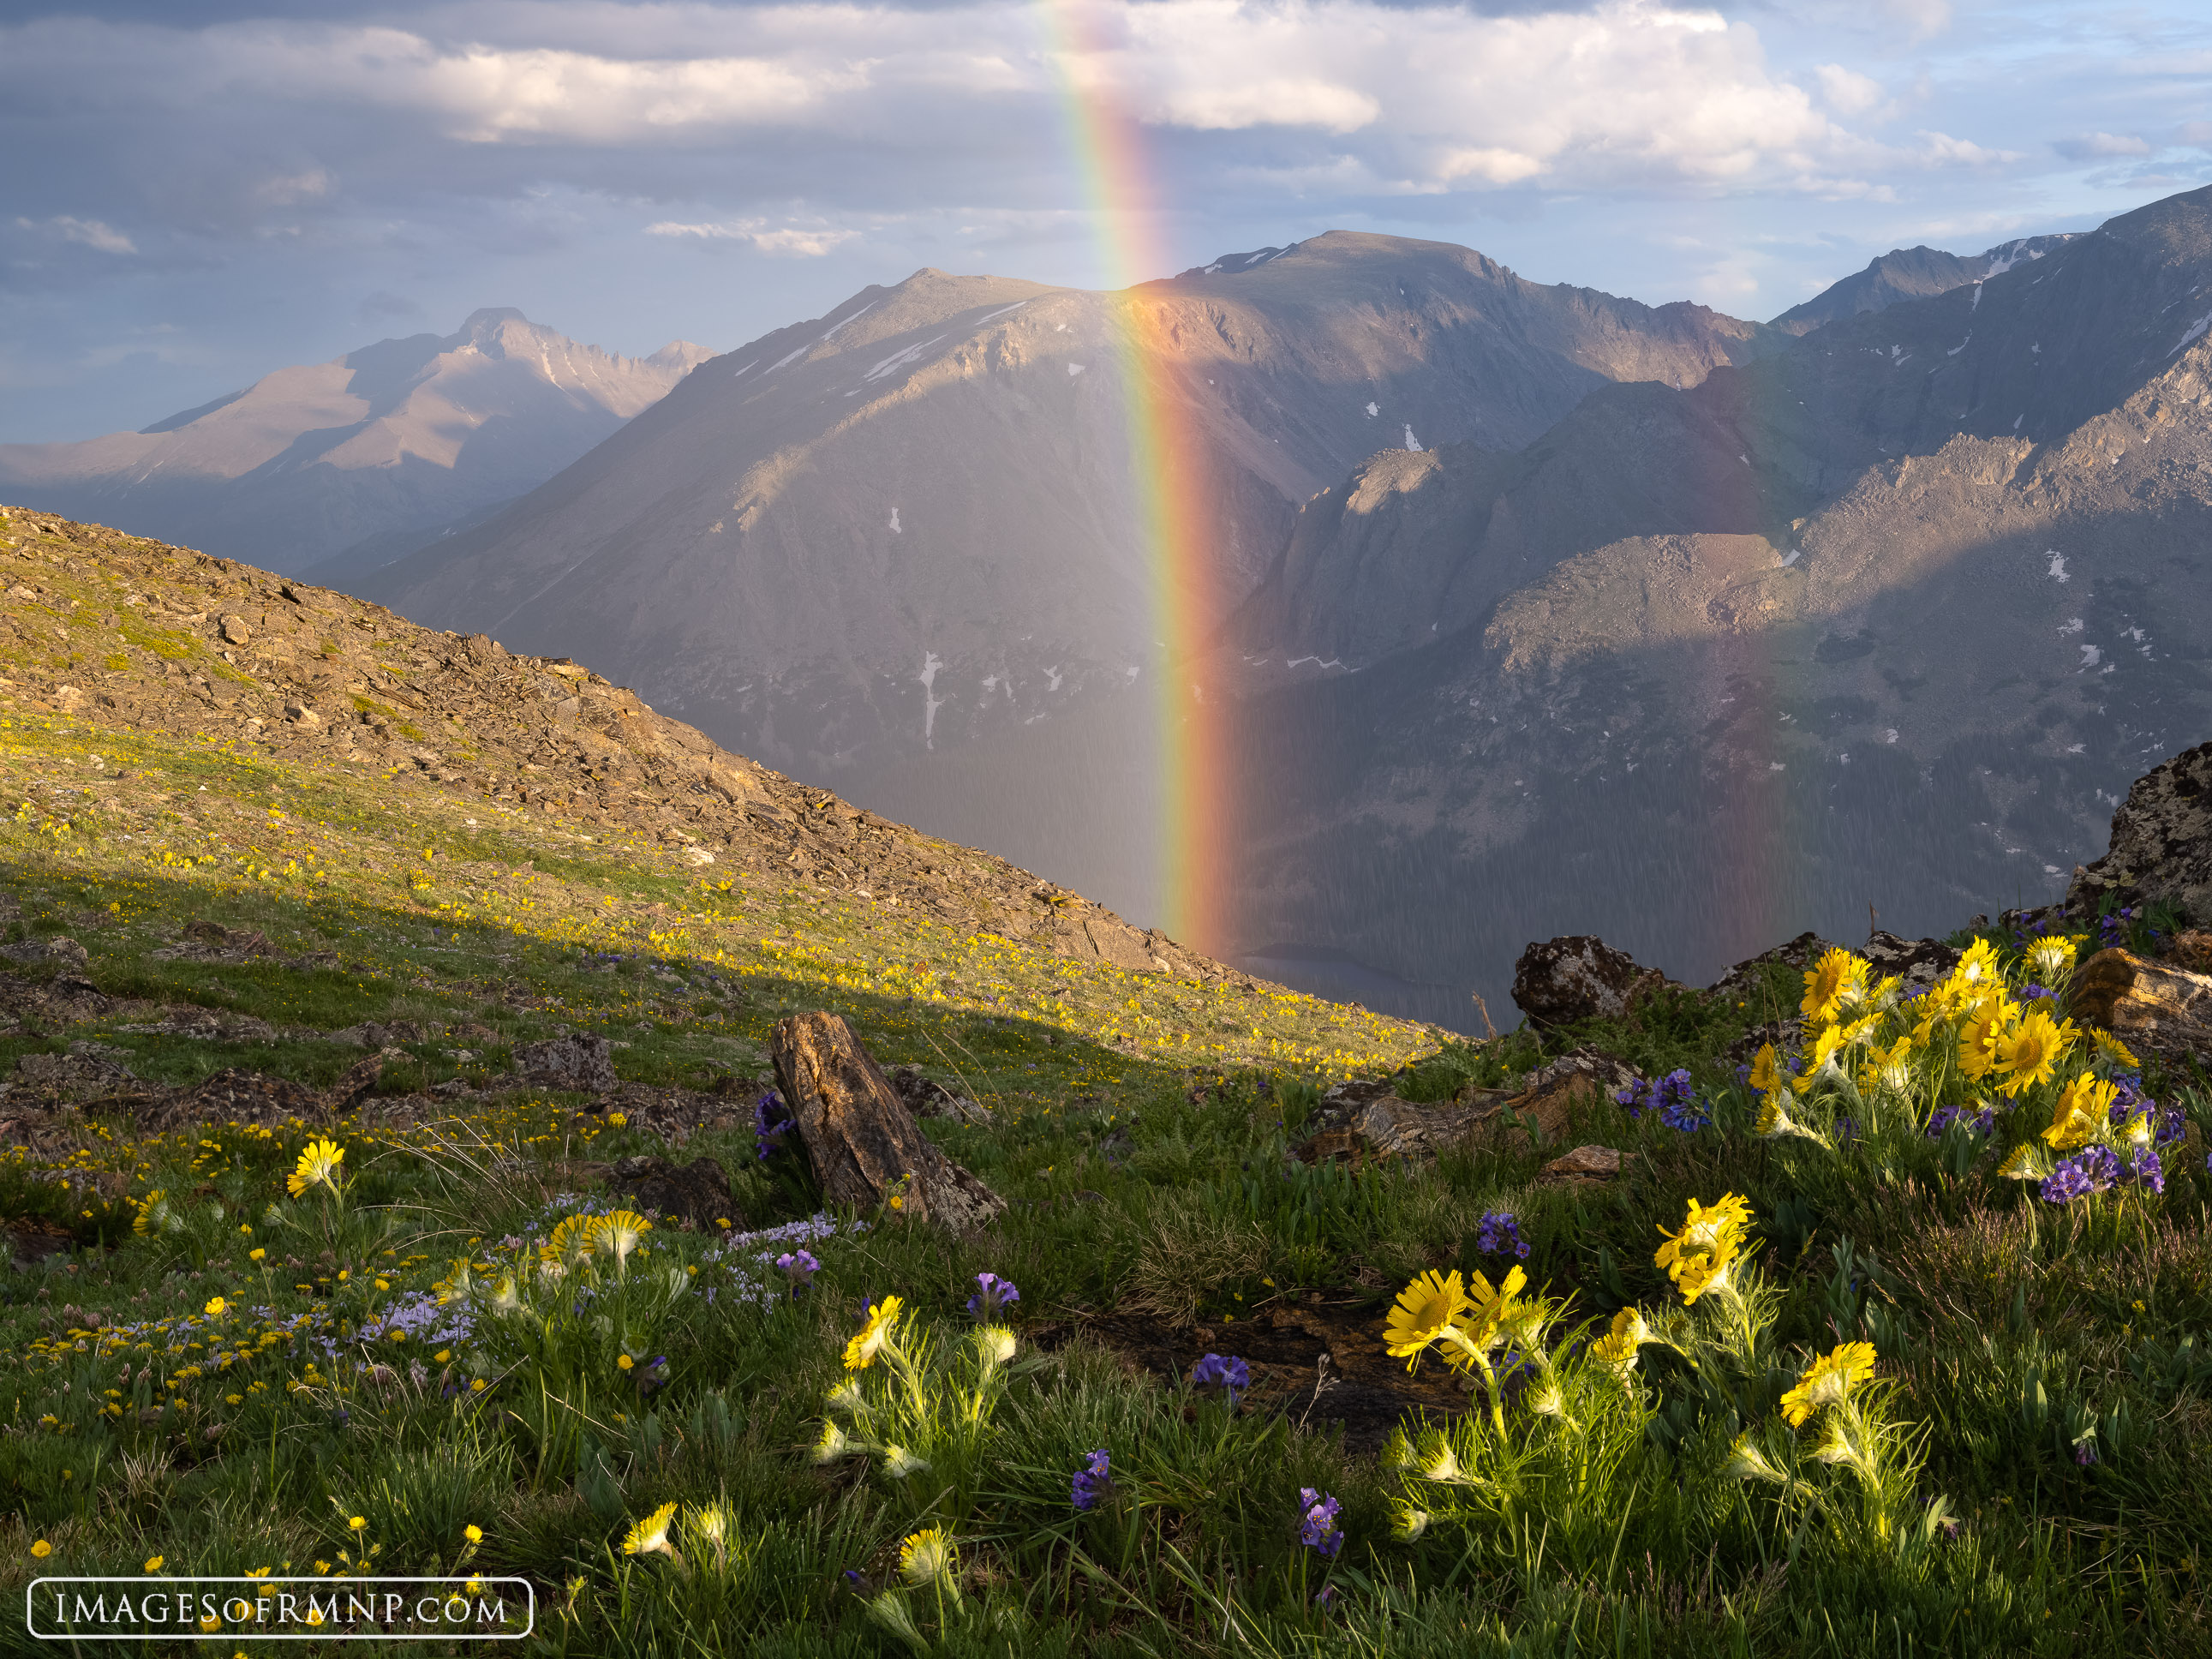 On a warm July evening, the alpine sunflowers turned to look at the gorgeous rainbows over Forest Canyon while Longs Peak looked...